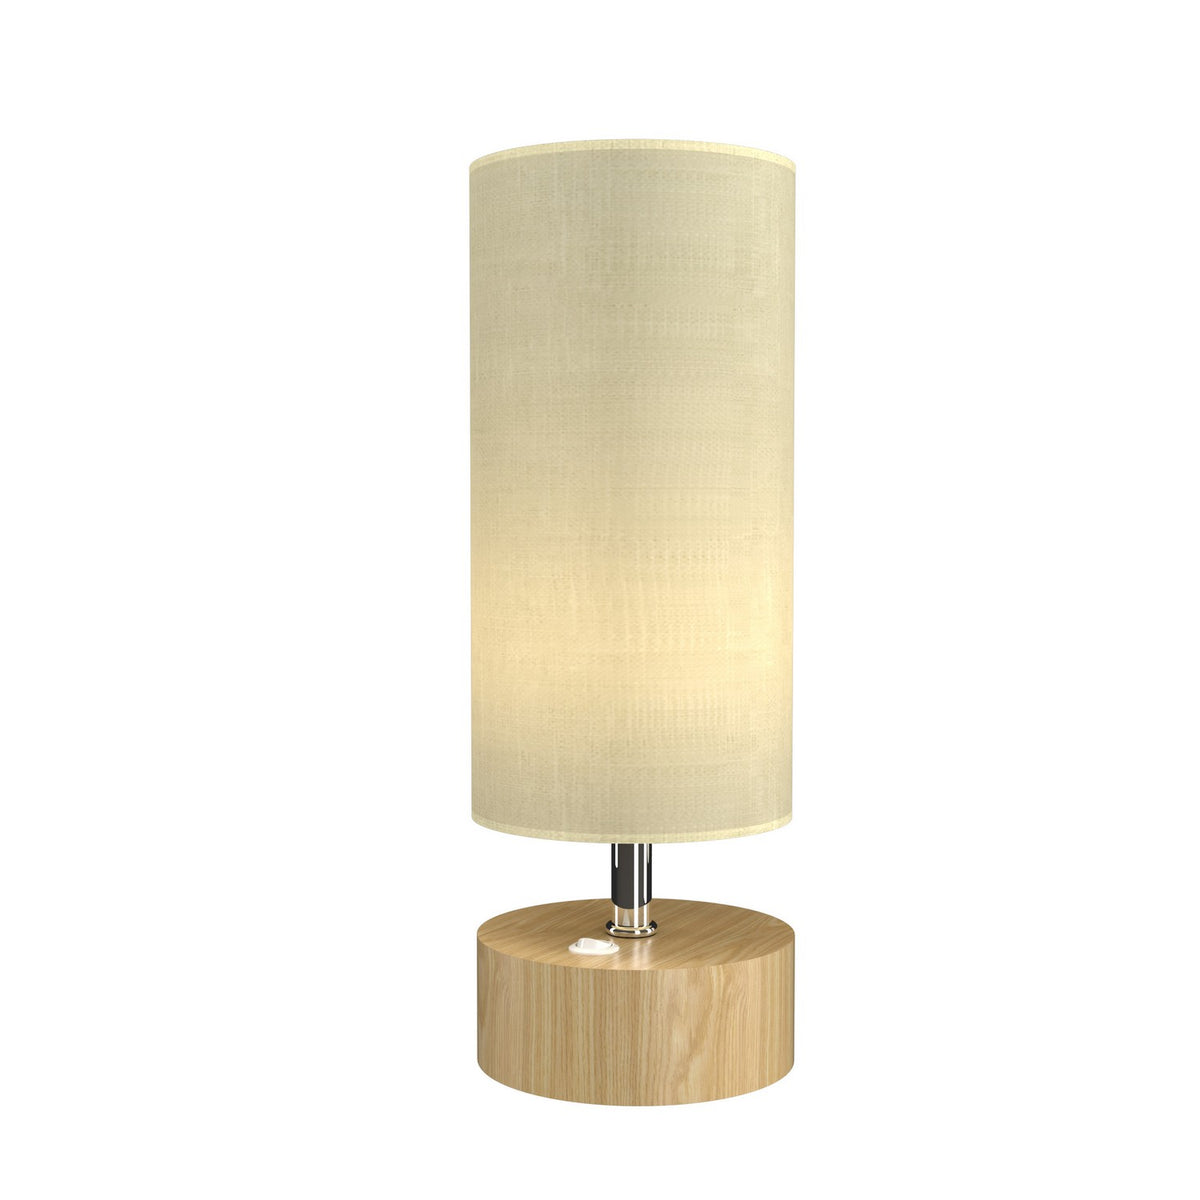 Accord Lighting - 7100.45 - LED Table Lamp - Clean - Sand